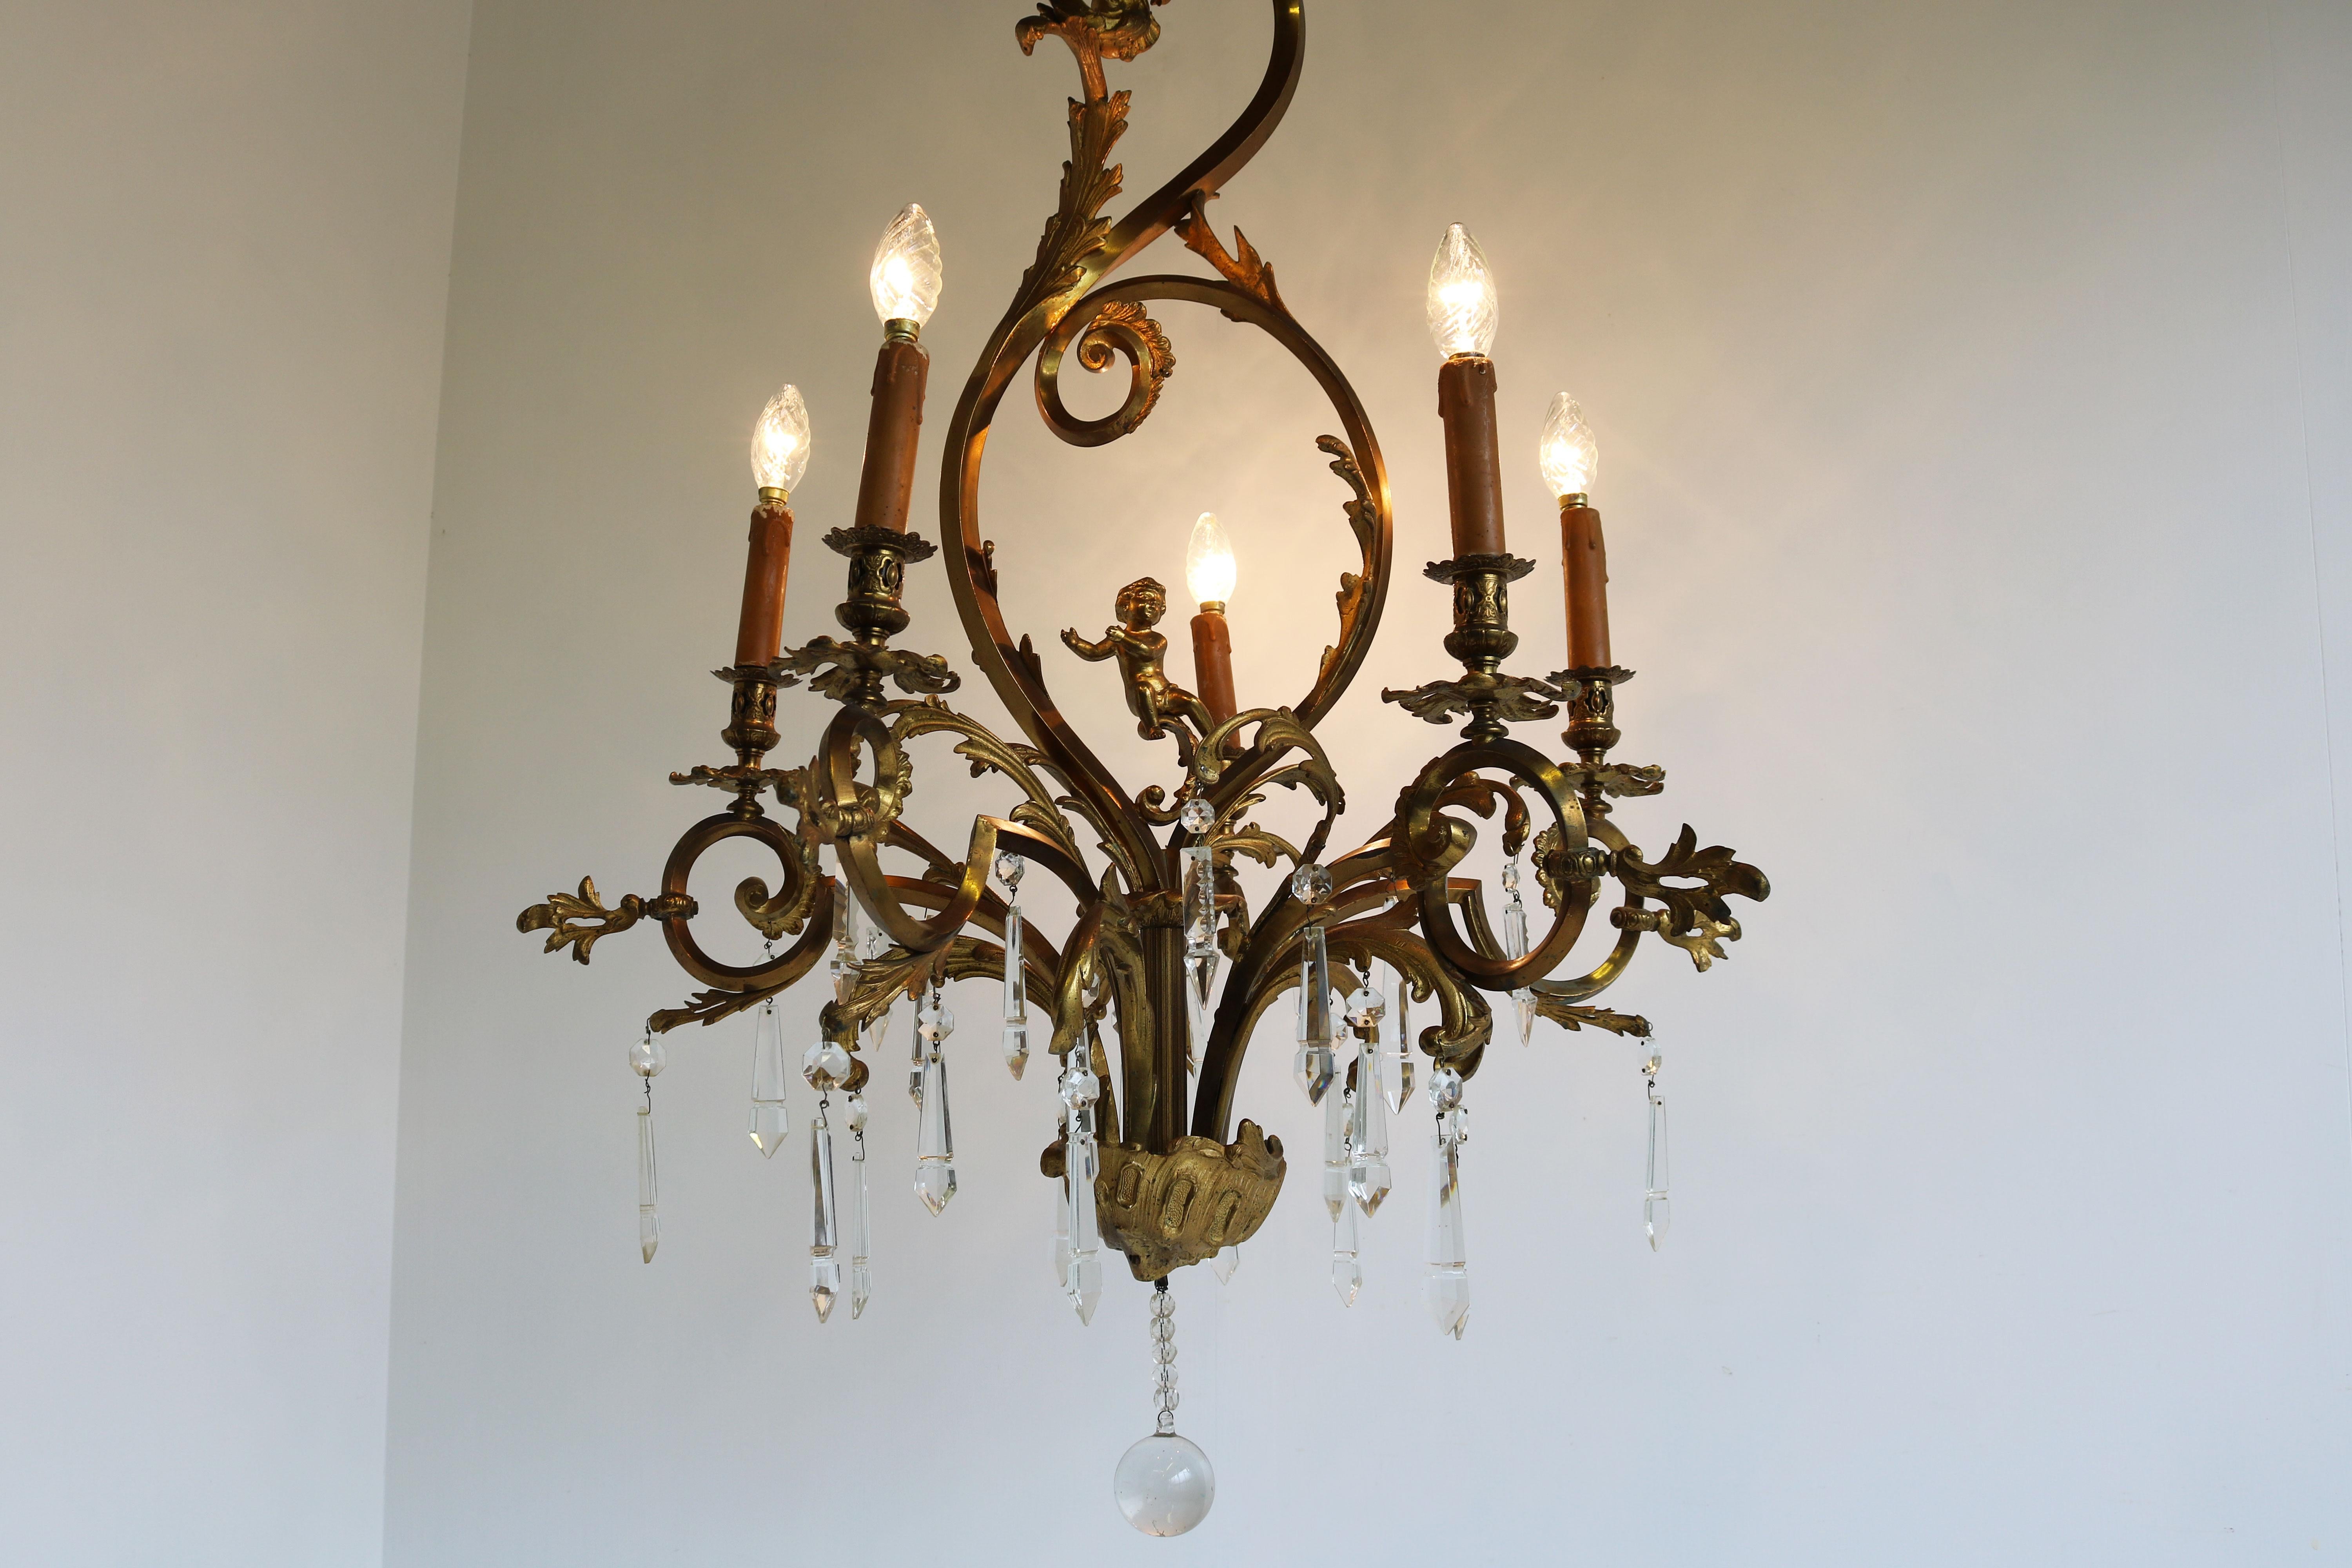 Exquisite gilded bronze chandelier from France Louis XV style / Rococo Revival 1880.
Crystal glass drops combined with the gilded bronze rococo curves makes it feel & look very luxurious. 
The chandelier has an impressive size and is a true